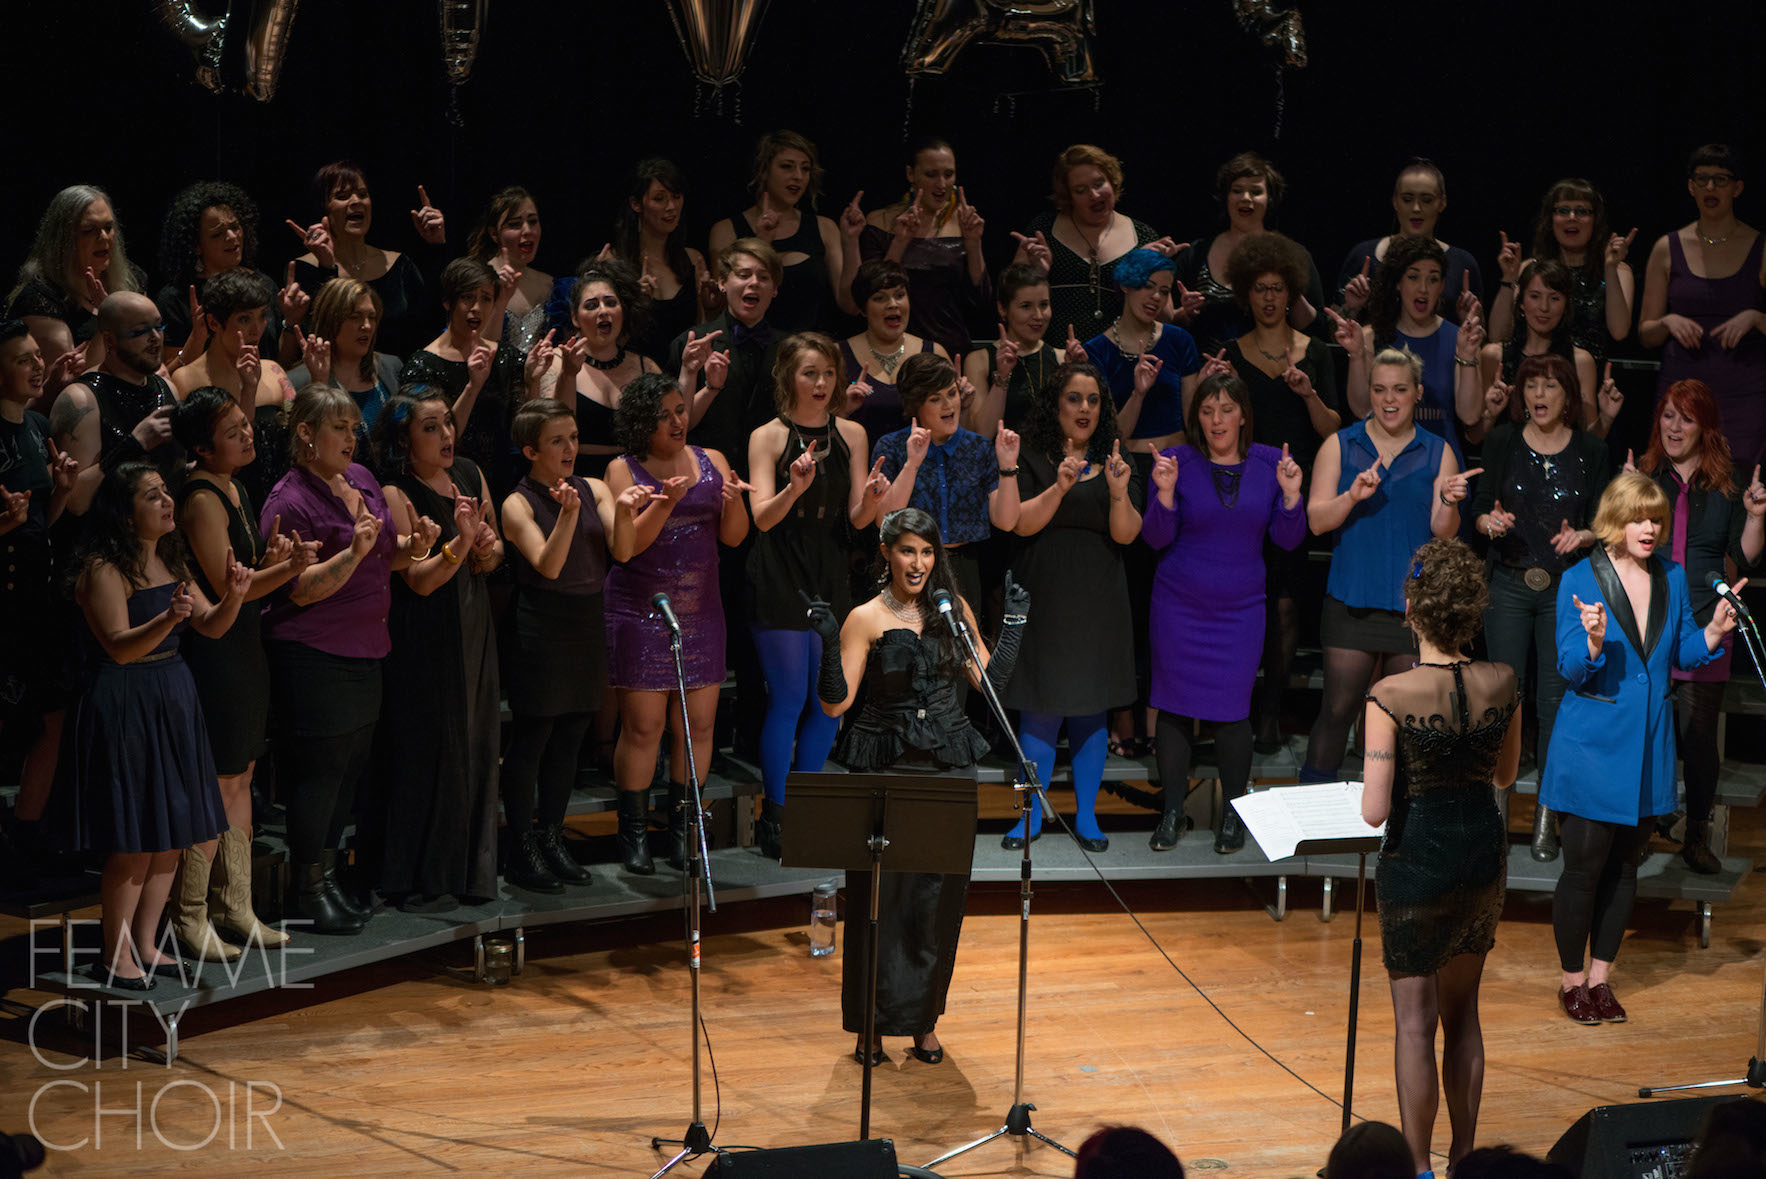 Femme City Choir in Divas! at Vancouver Community College Auditorium, Vancouver BC 2015 Photo by RDM Photography and Art